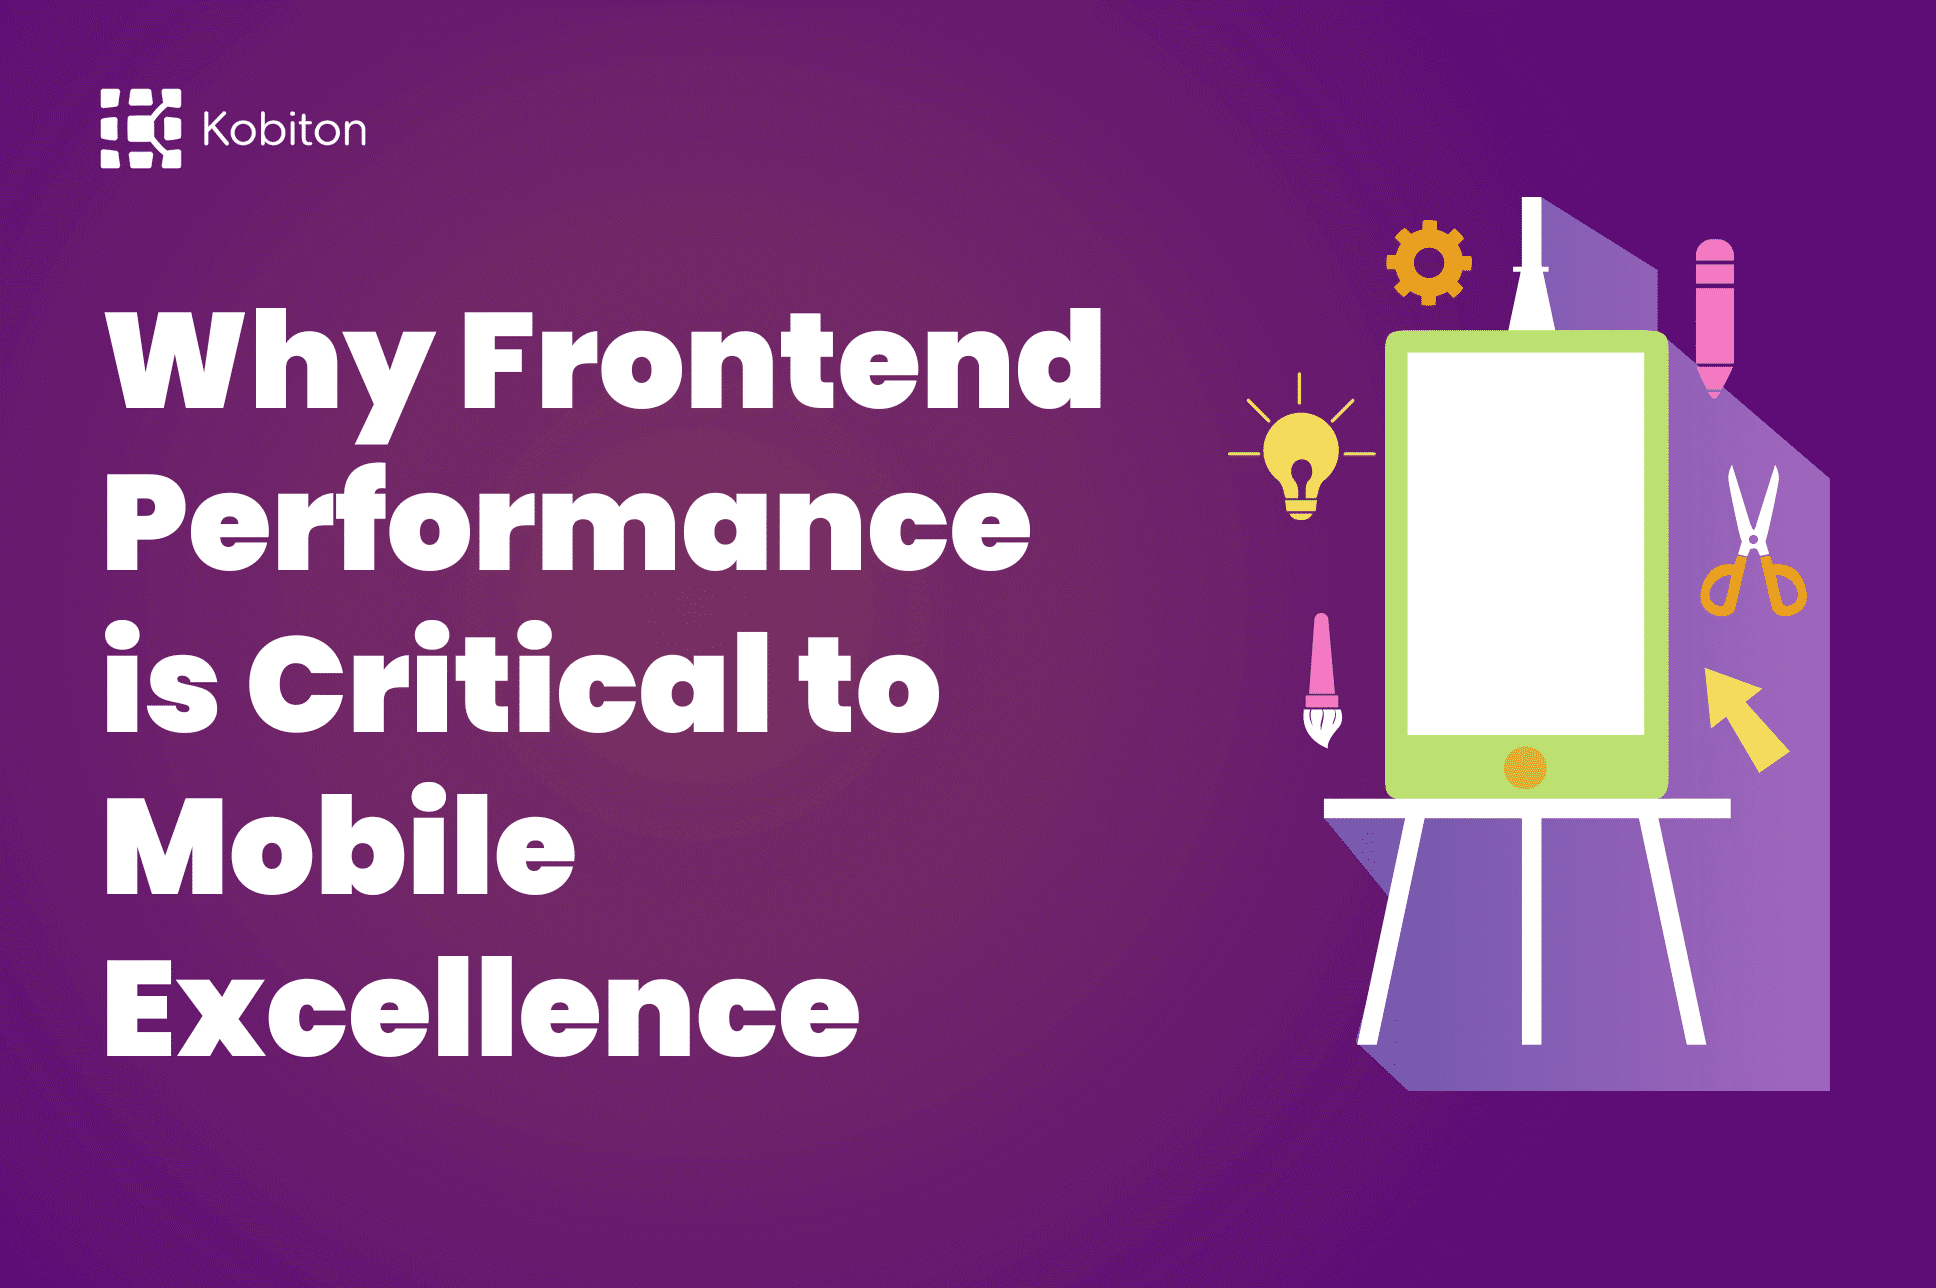 Why Frontend Performance is Critical to Mobile Excellence